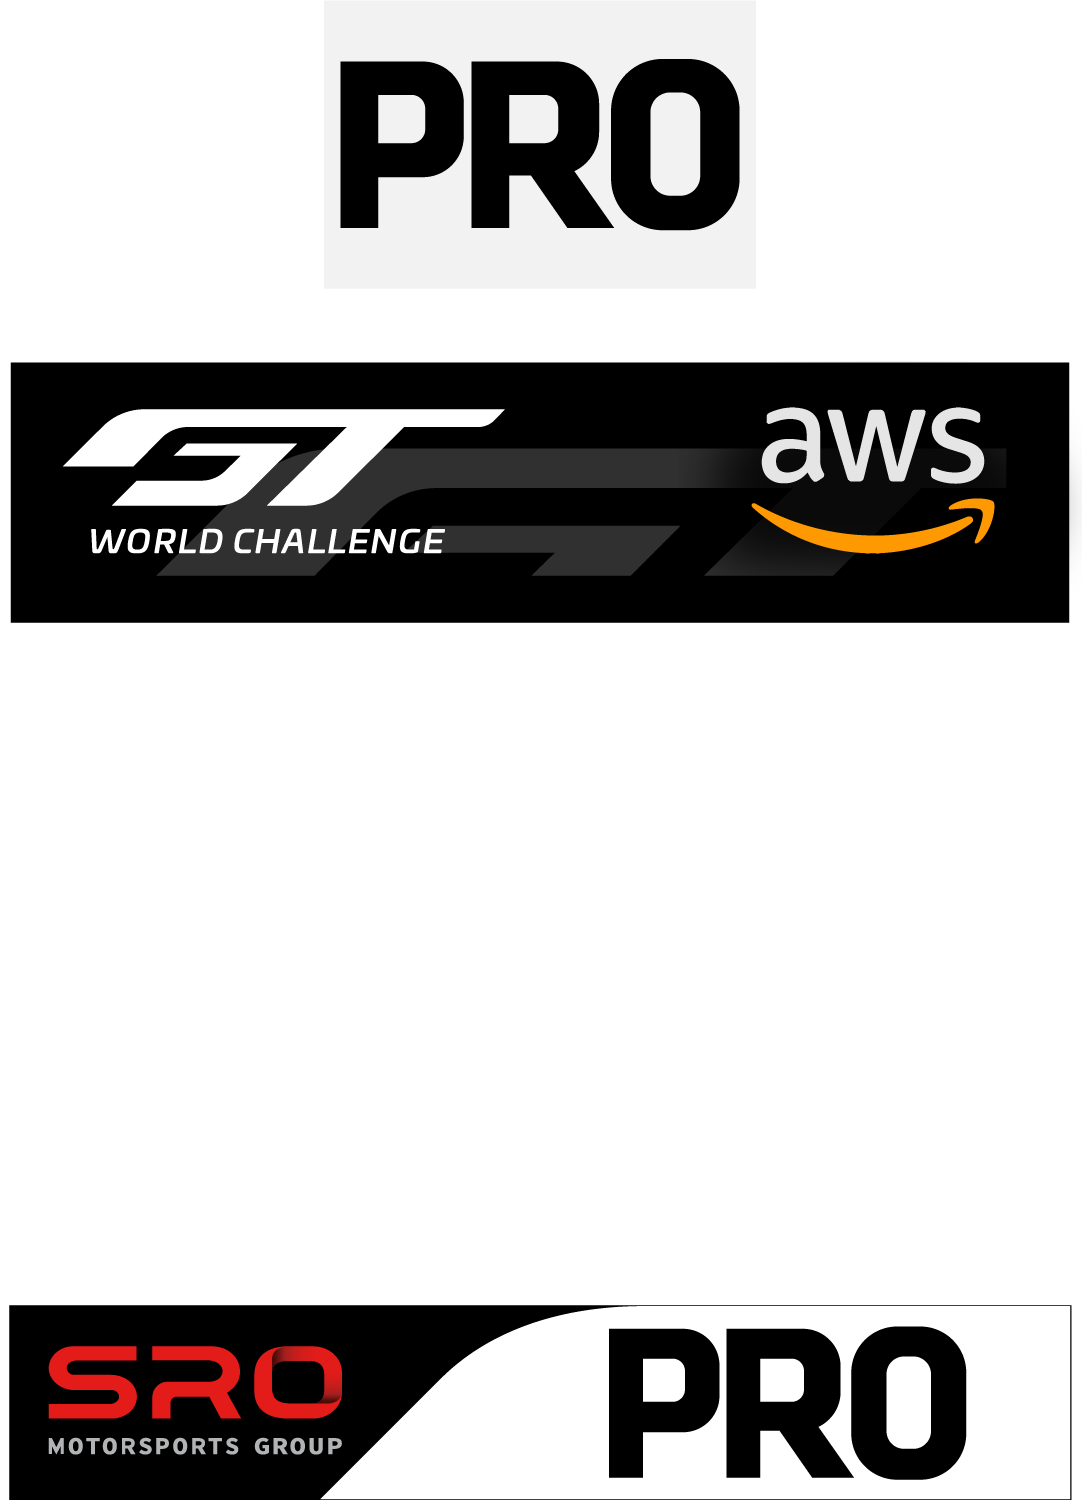 PRO_BLANCPAIN_AWS_2019 LATE.png